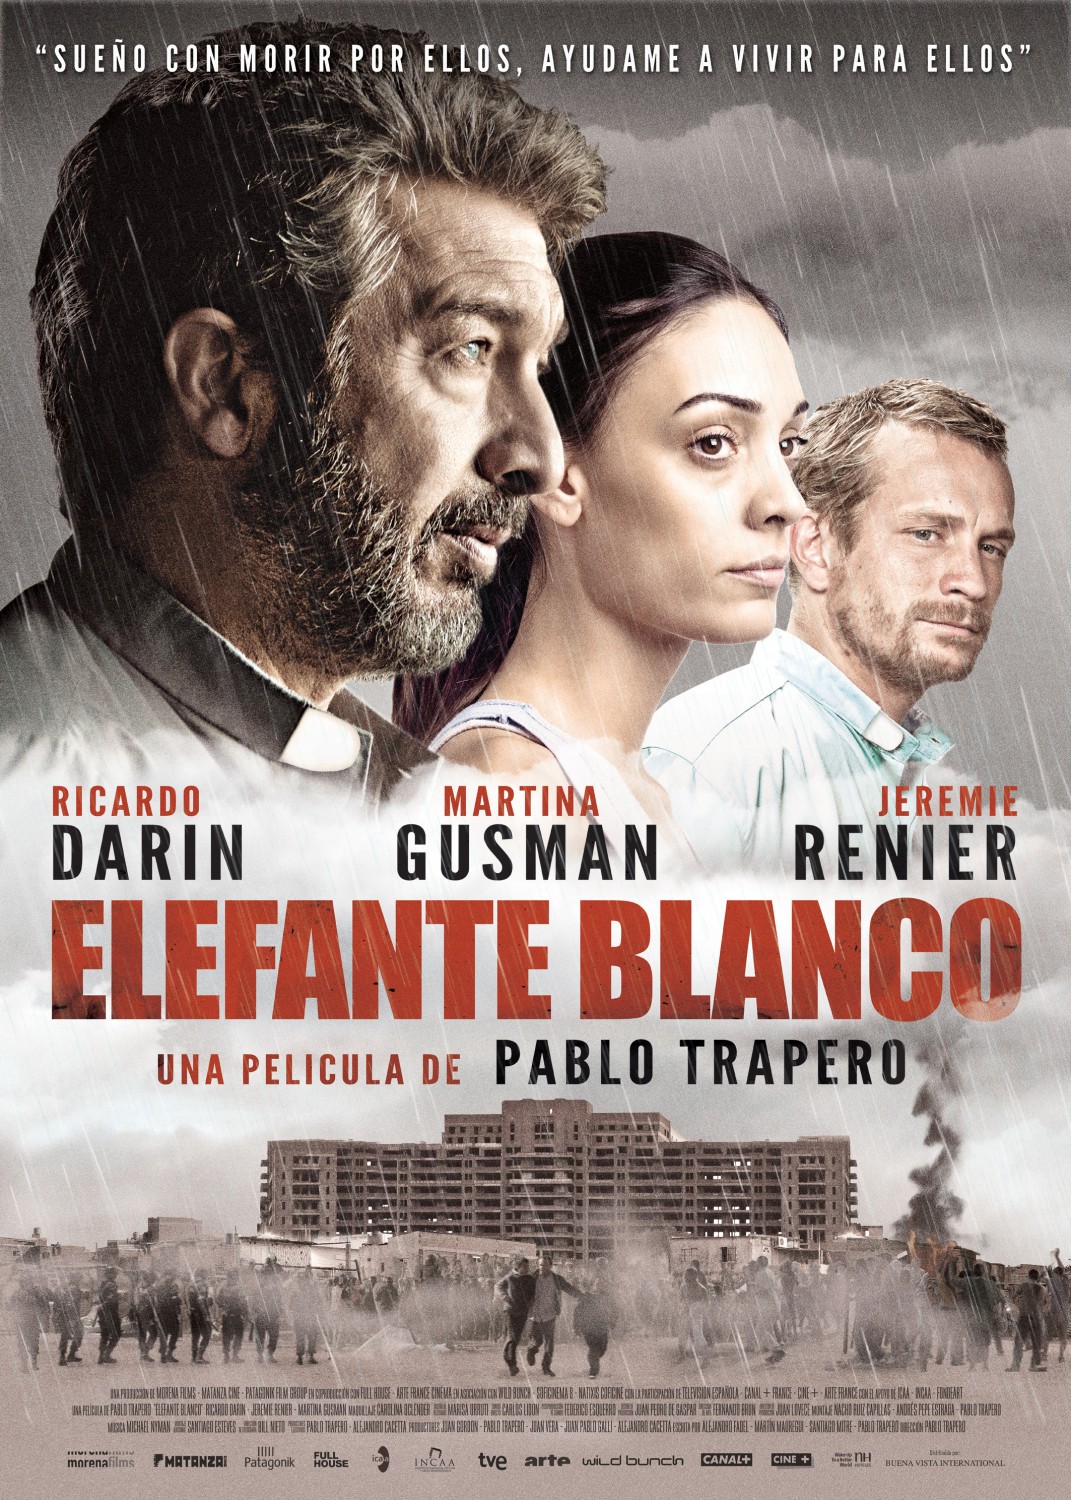 Extra Large Movie Poster Image for Elefante blanco (#2 of 7)